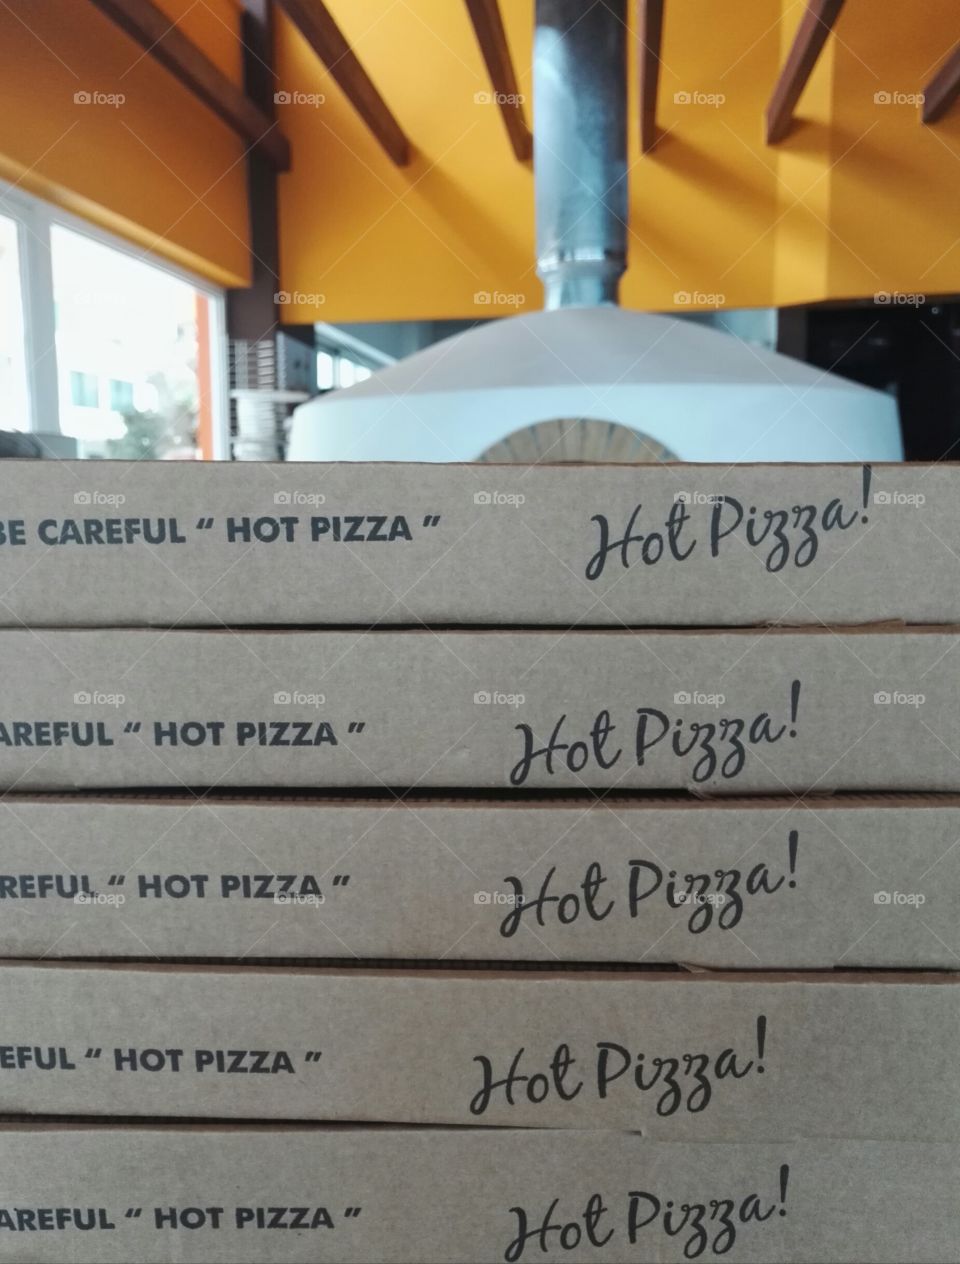 hot pizza boxes and wood fired oven